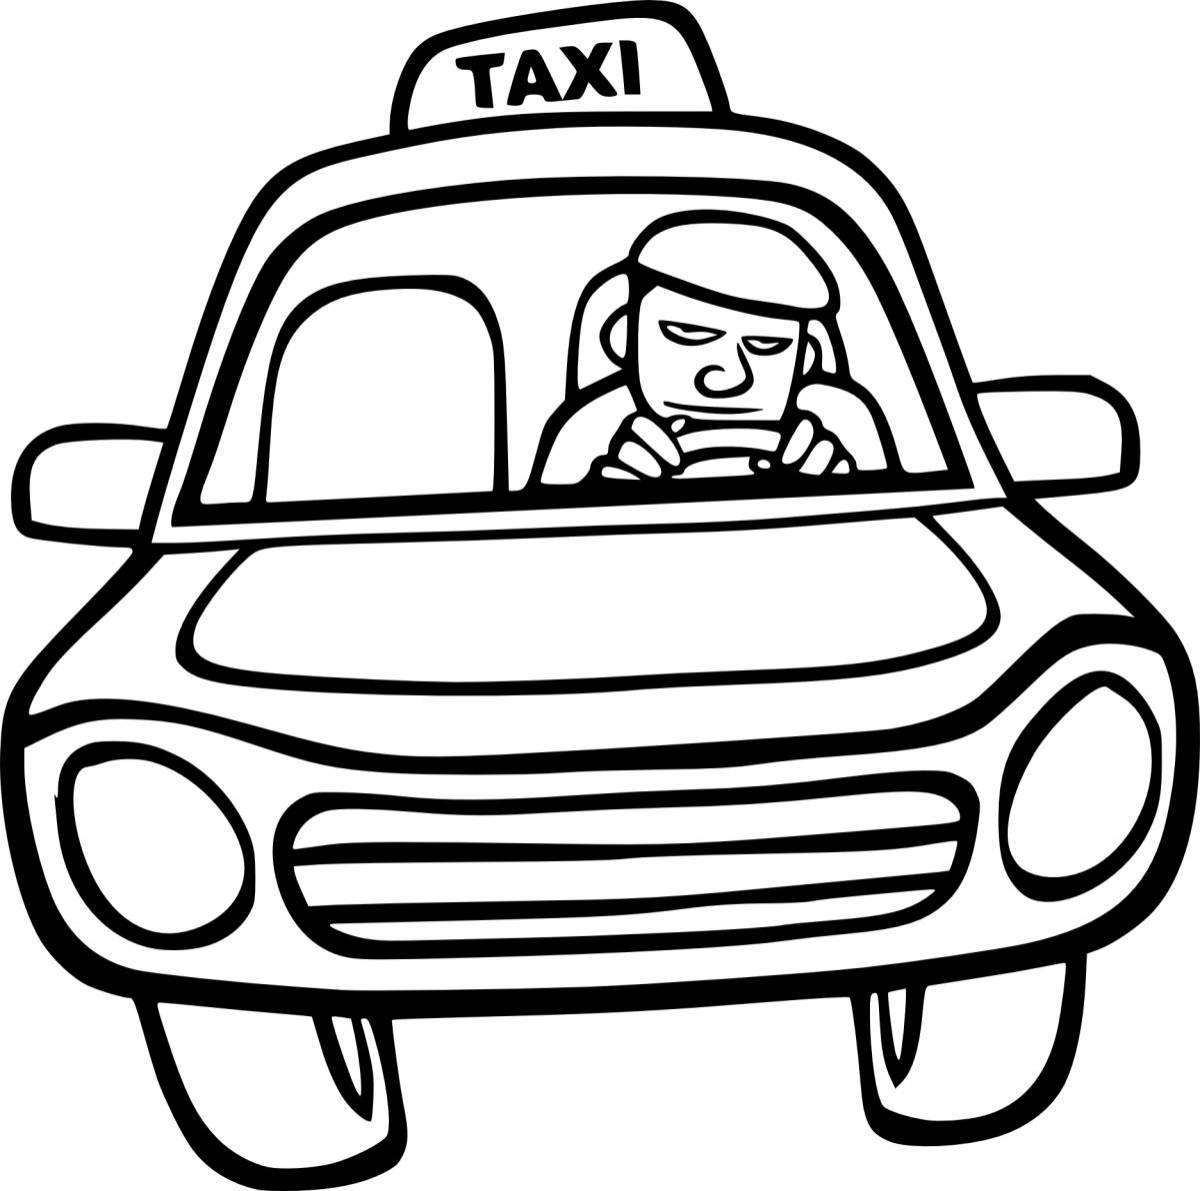 Cute taxi coloring book for kids 3-4 years old